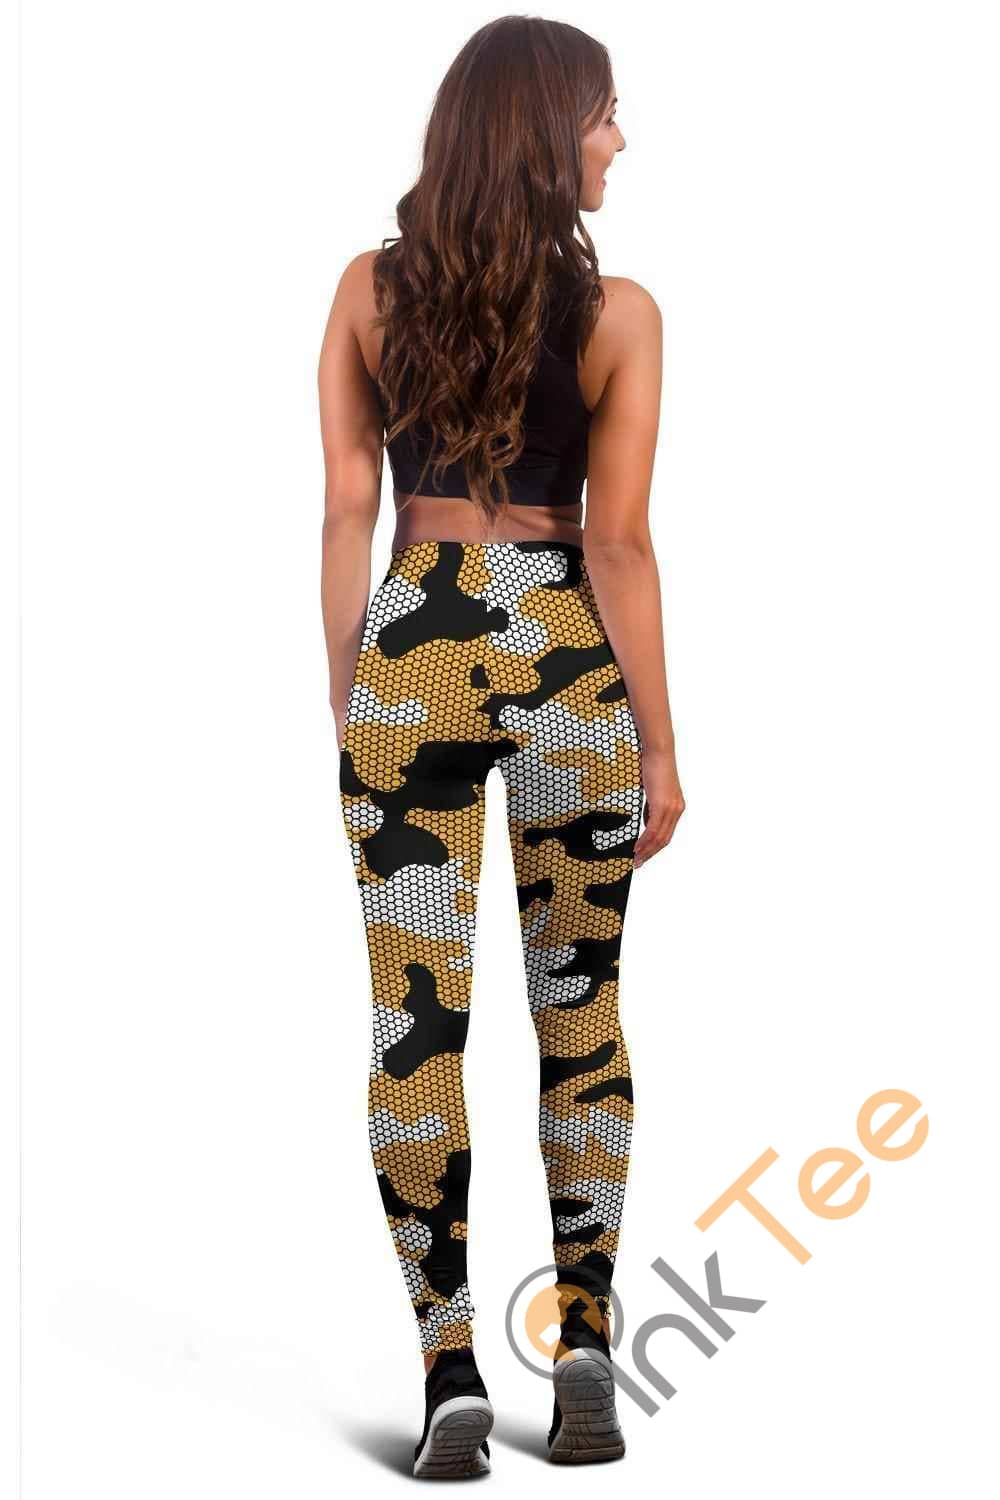 Inktee Store - Pittsburgh Steelers Inspired Hex Camo 3D All Over Print For Yoga Fitness Fashion Women'S Leggings Image